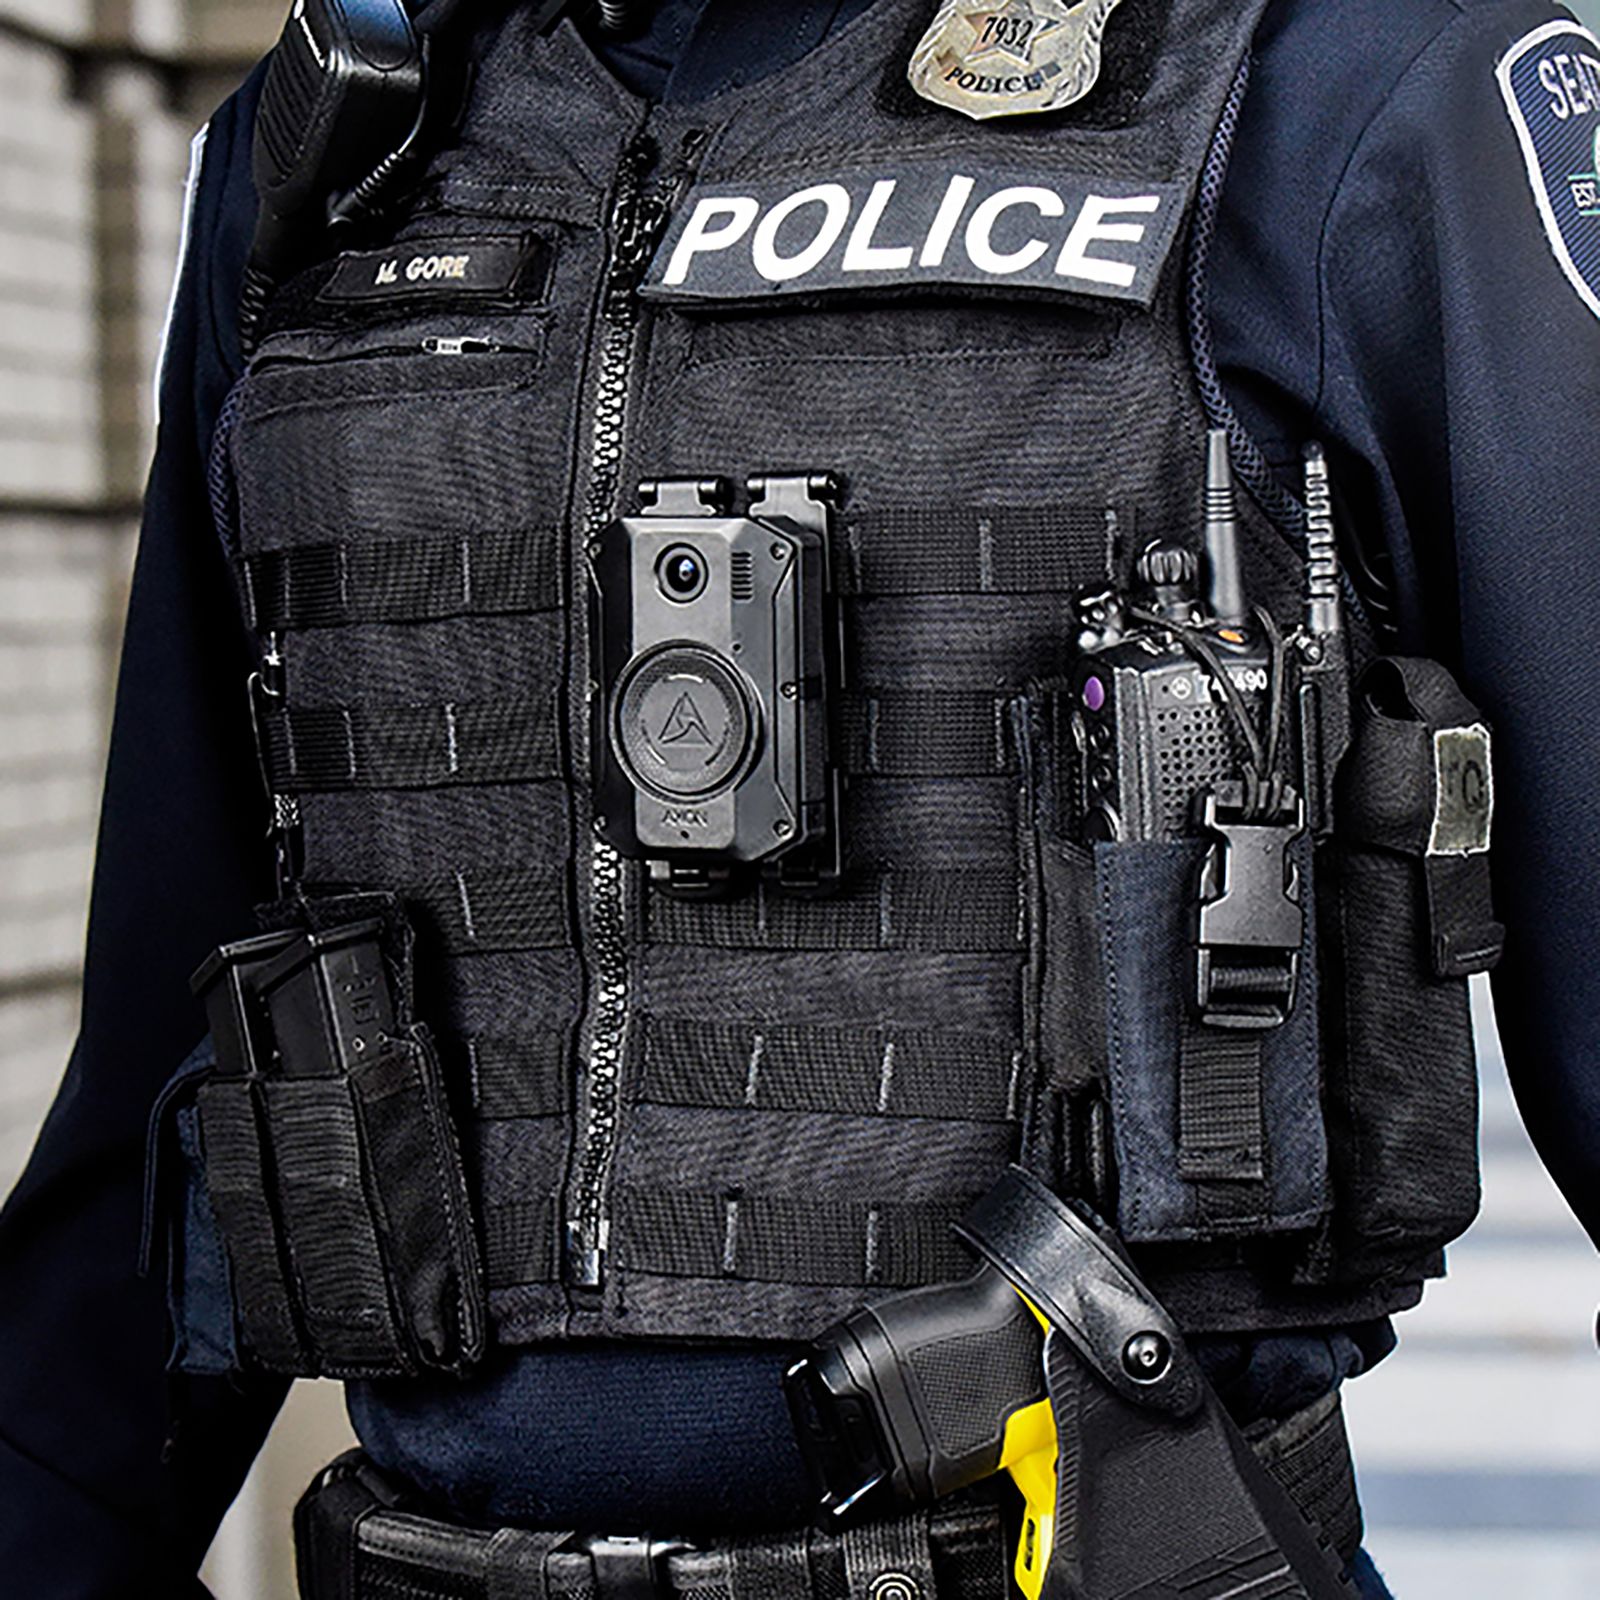 Officer's Guide to Police Body Cameras, Tactical Experts